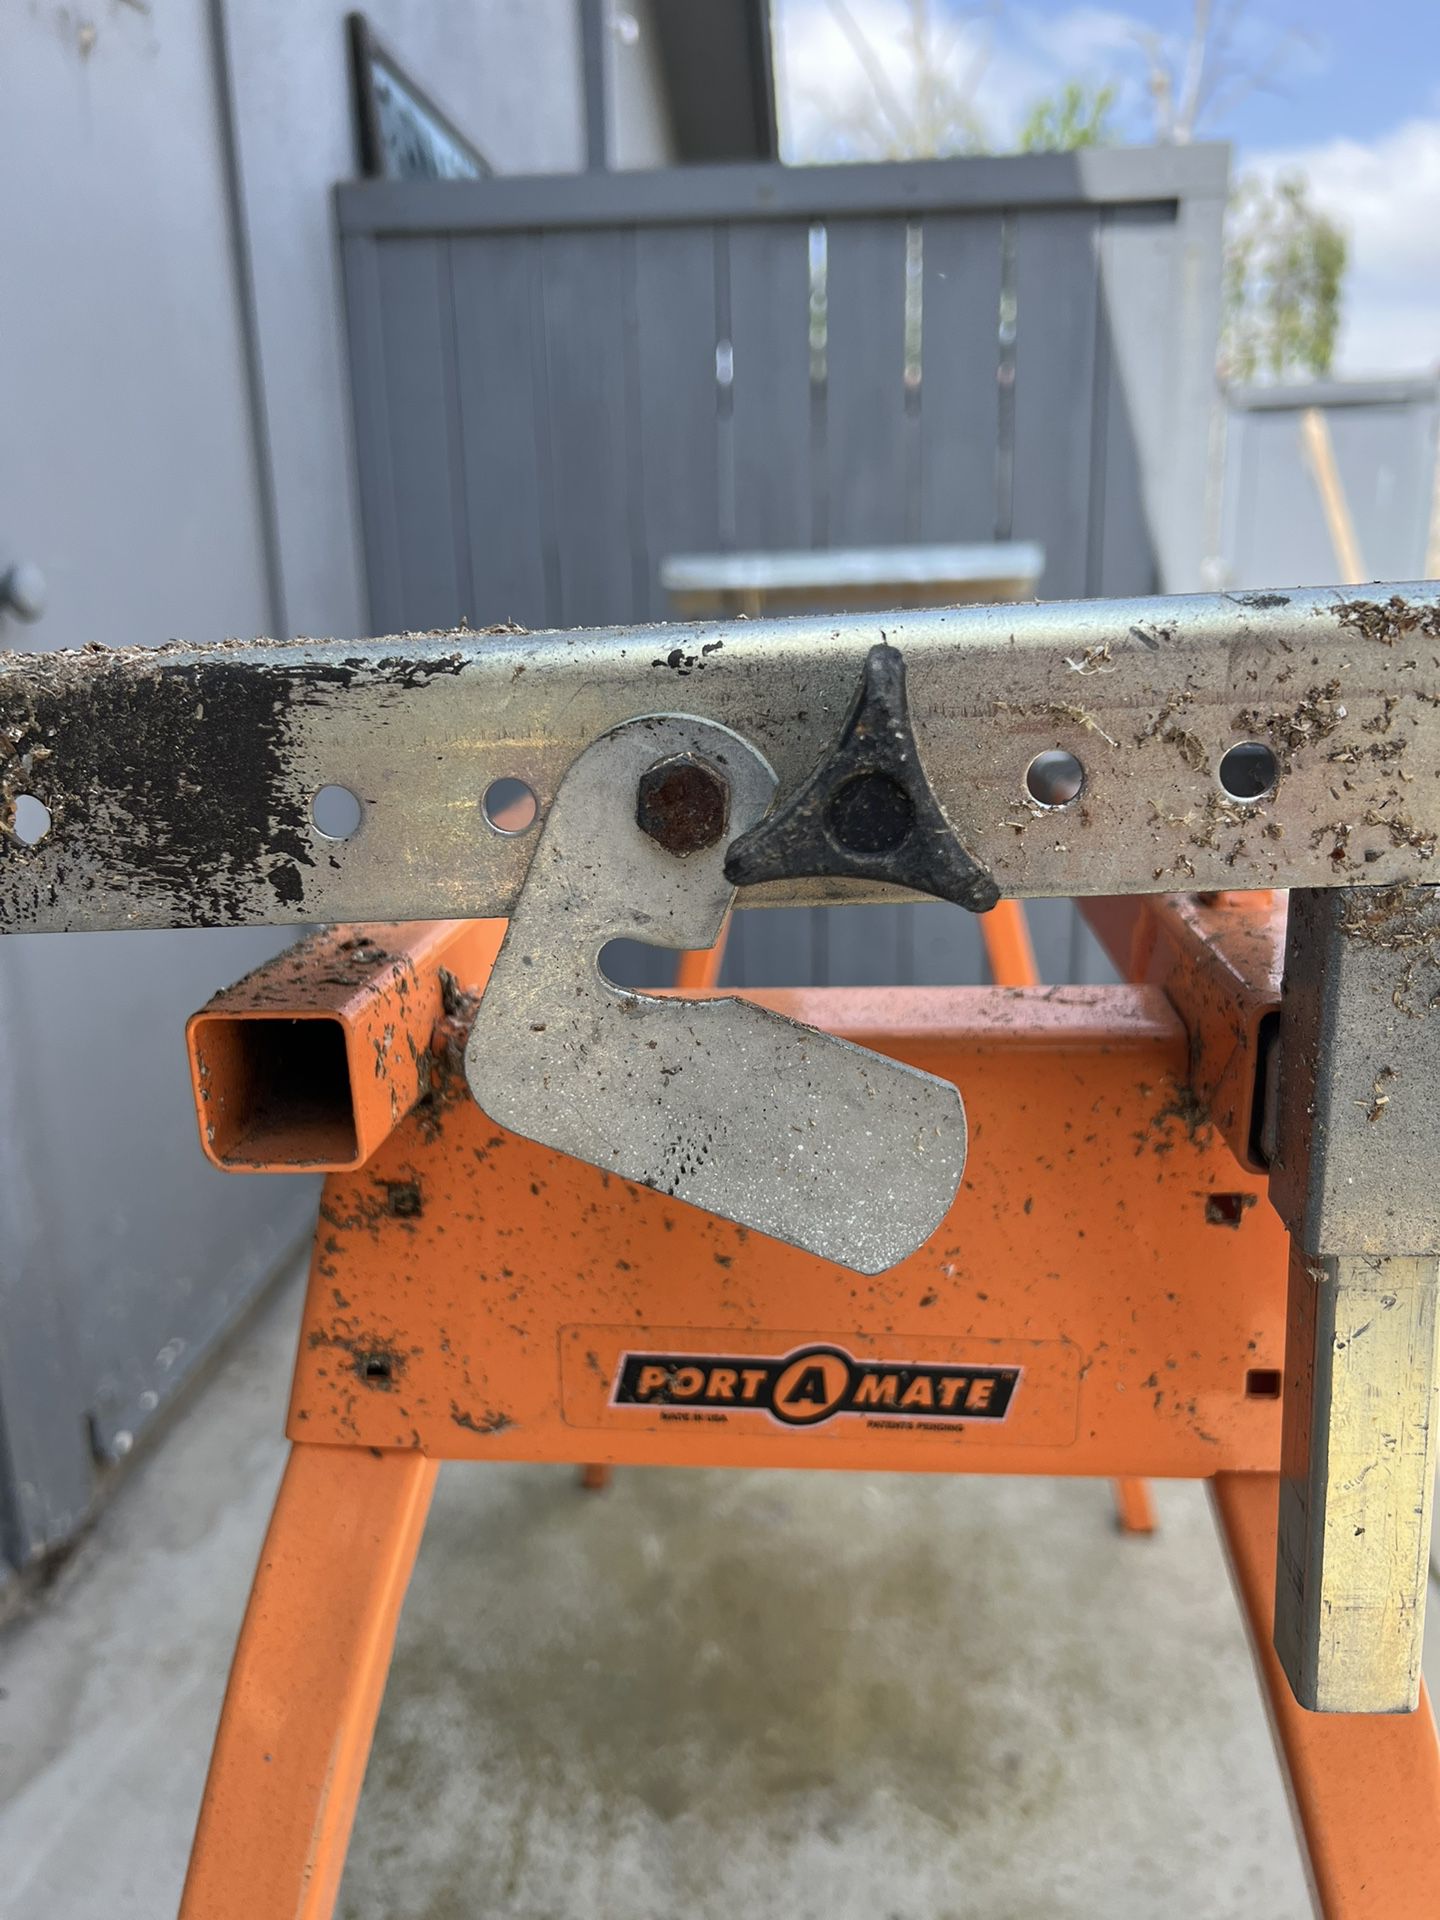 Port A mate Miter saw bench